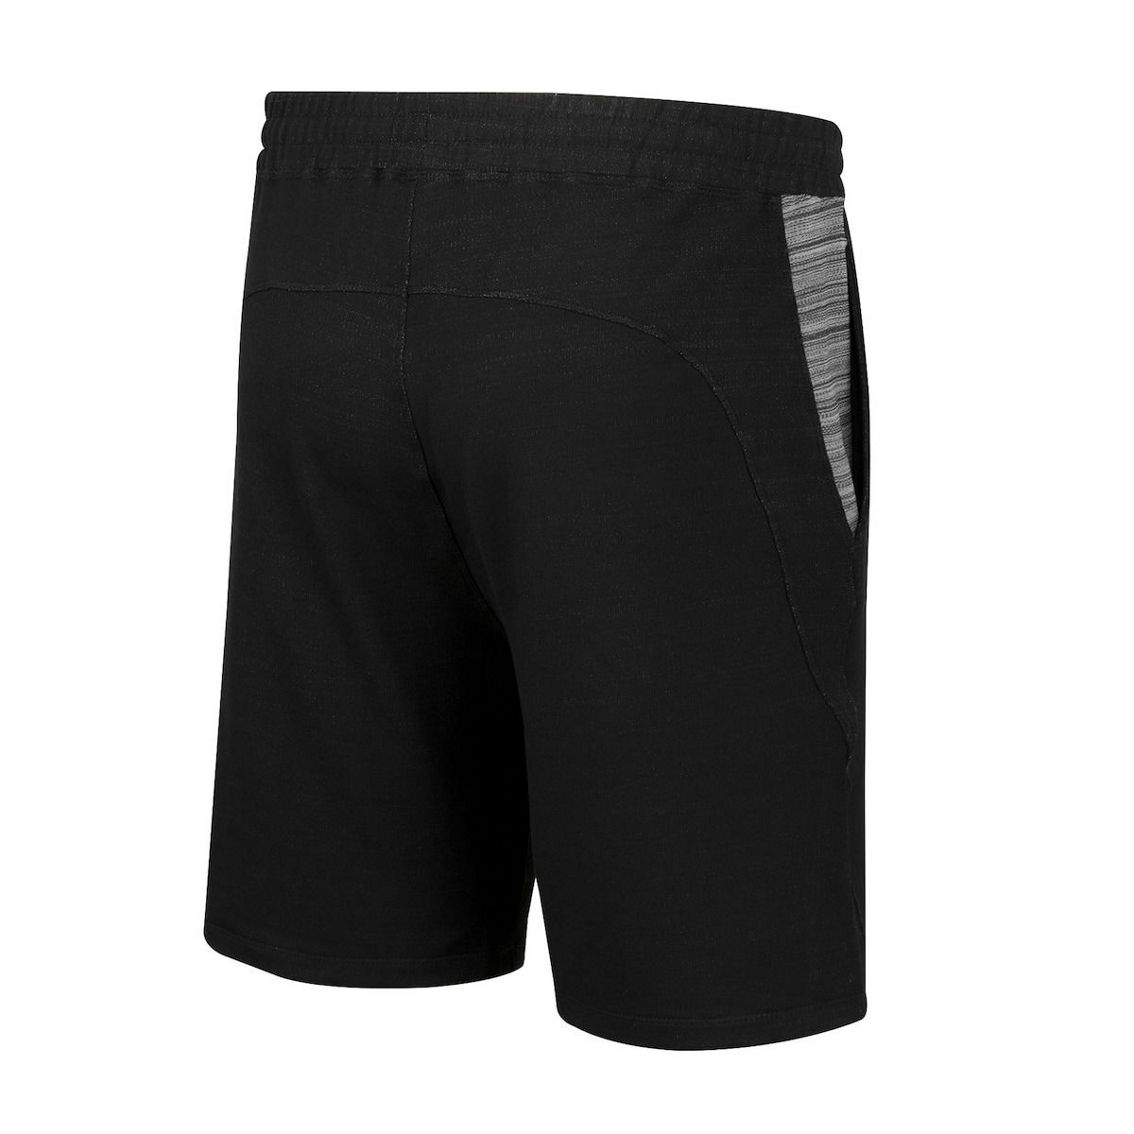 Colosseum Men's Black Air Force Falcons Wild Party Tri-Blend Shorts - Image 4 of 4